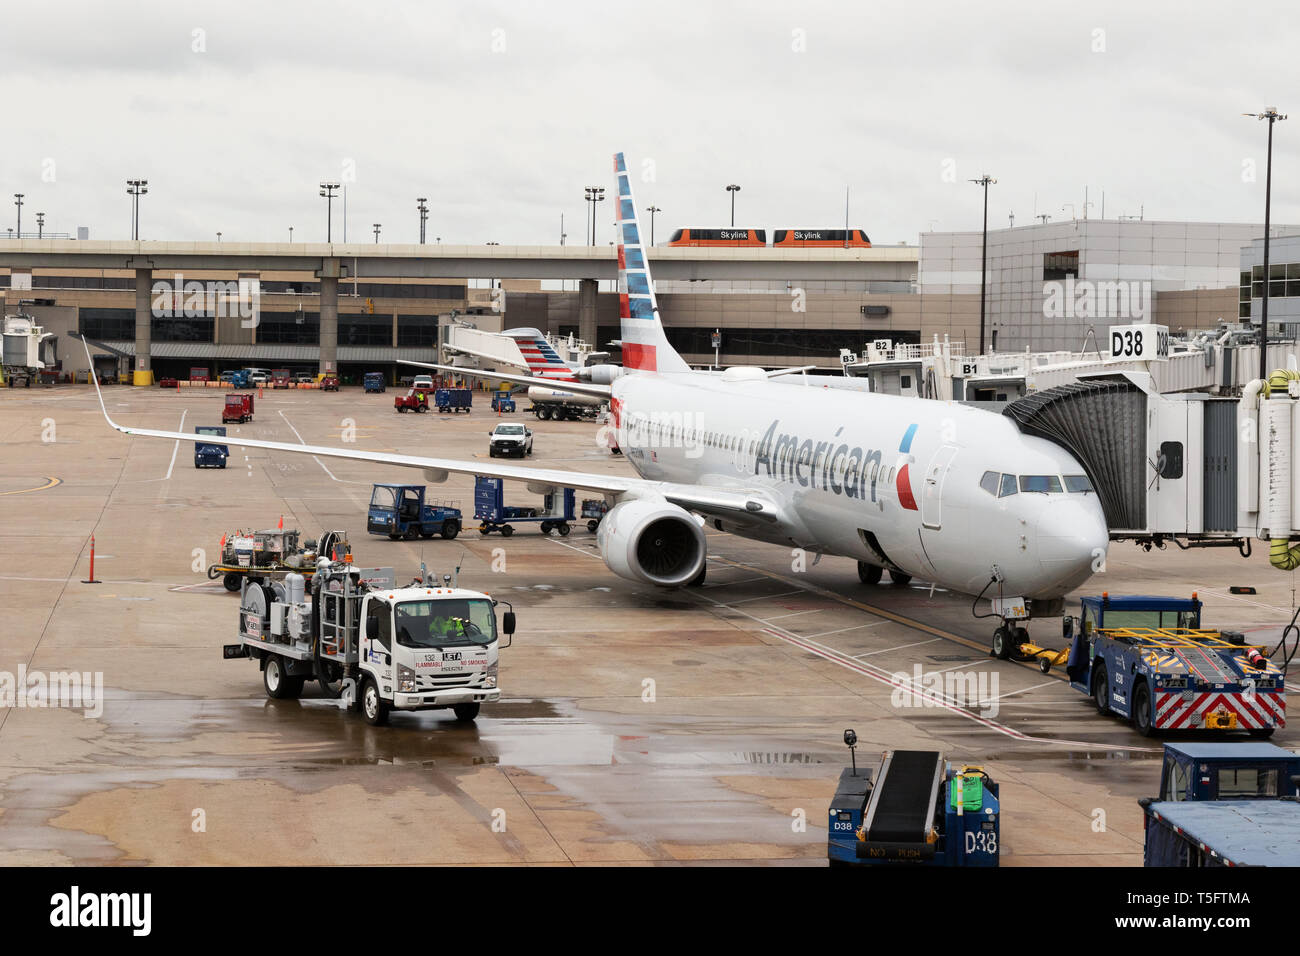 An American Airlines plane on the ground at the American Airlines hub airport, Dallas Fort Worth International airport, Dallas, Texas USA Stock Photo